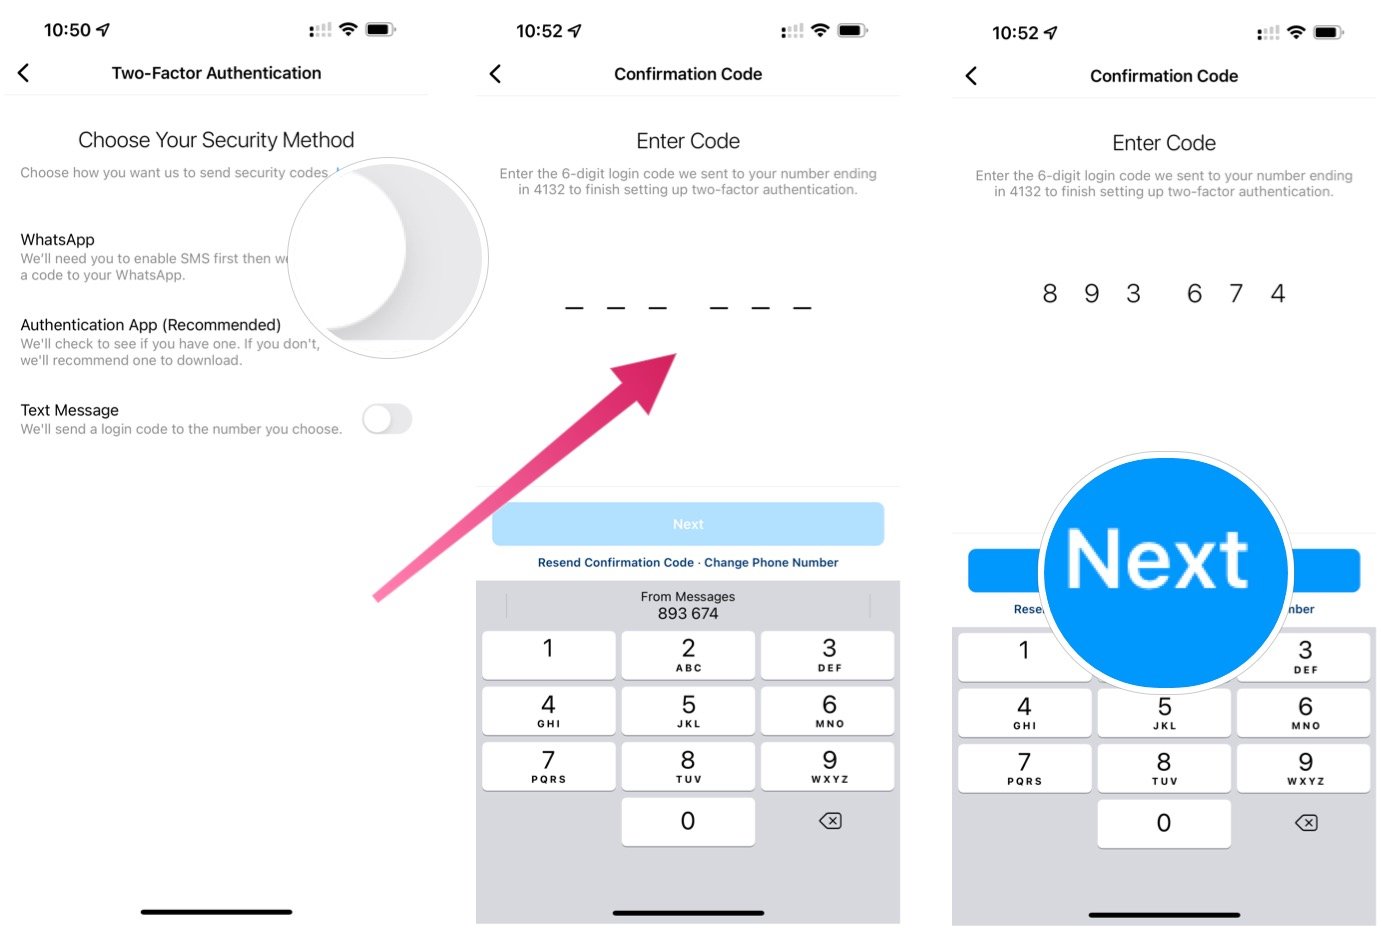 To authenticate through a text message, toggle on Text Message, then enter the six-digit code you've received through your mobile phone. Tap Next, then follow additional directions.